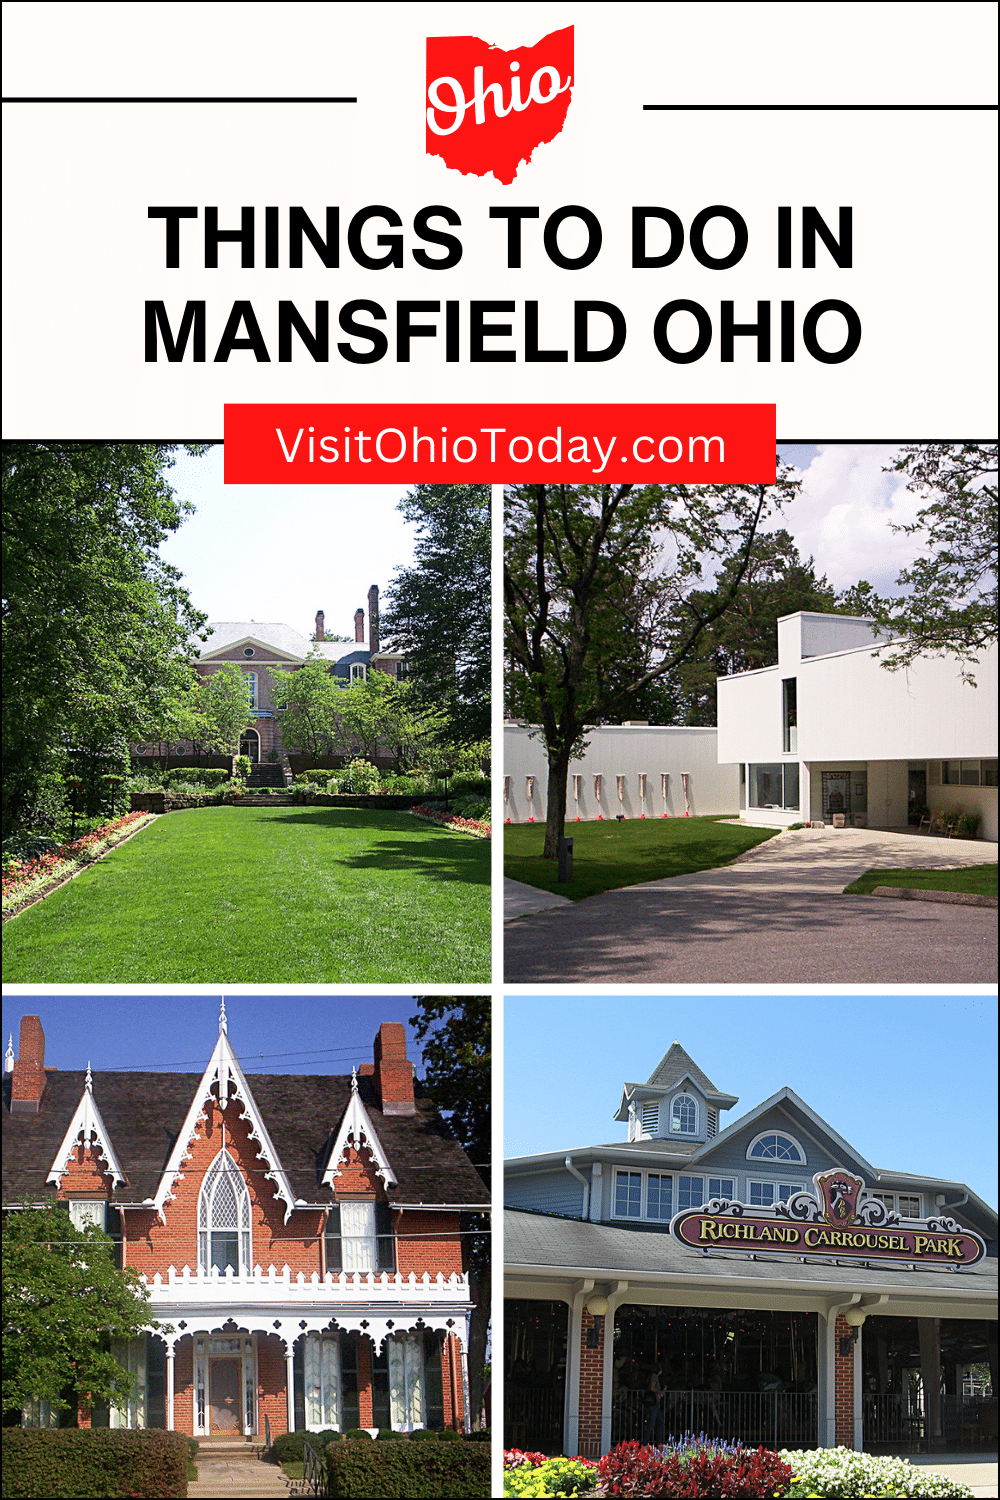 vertical image with 4 photos from places in Mansfield: Kingwood Garden Center, Mansfield Art Center, Oak Hill Cottage, and Richland Carrousel Park. A white strip across the top has the text Things to Do in Mansfield Ohio